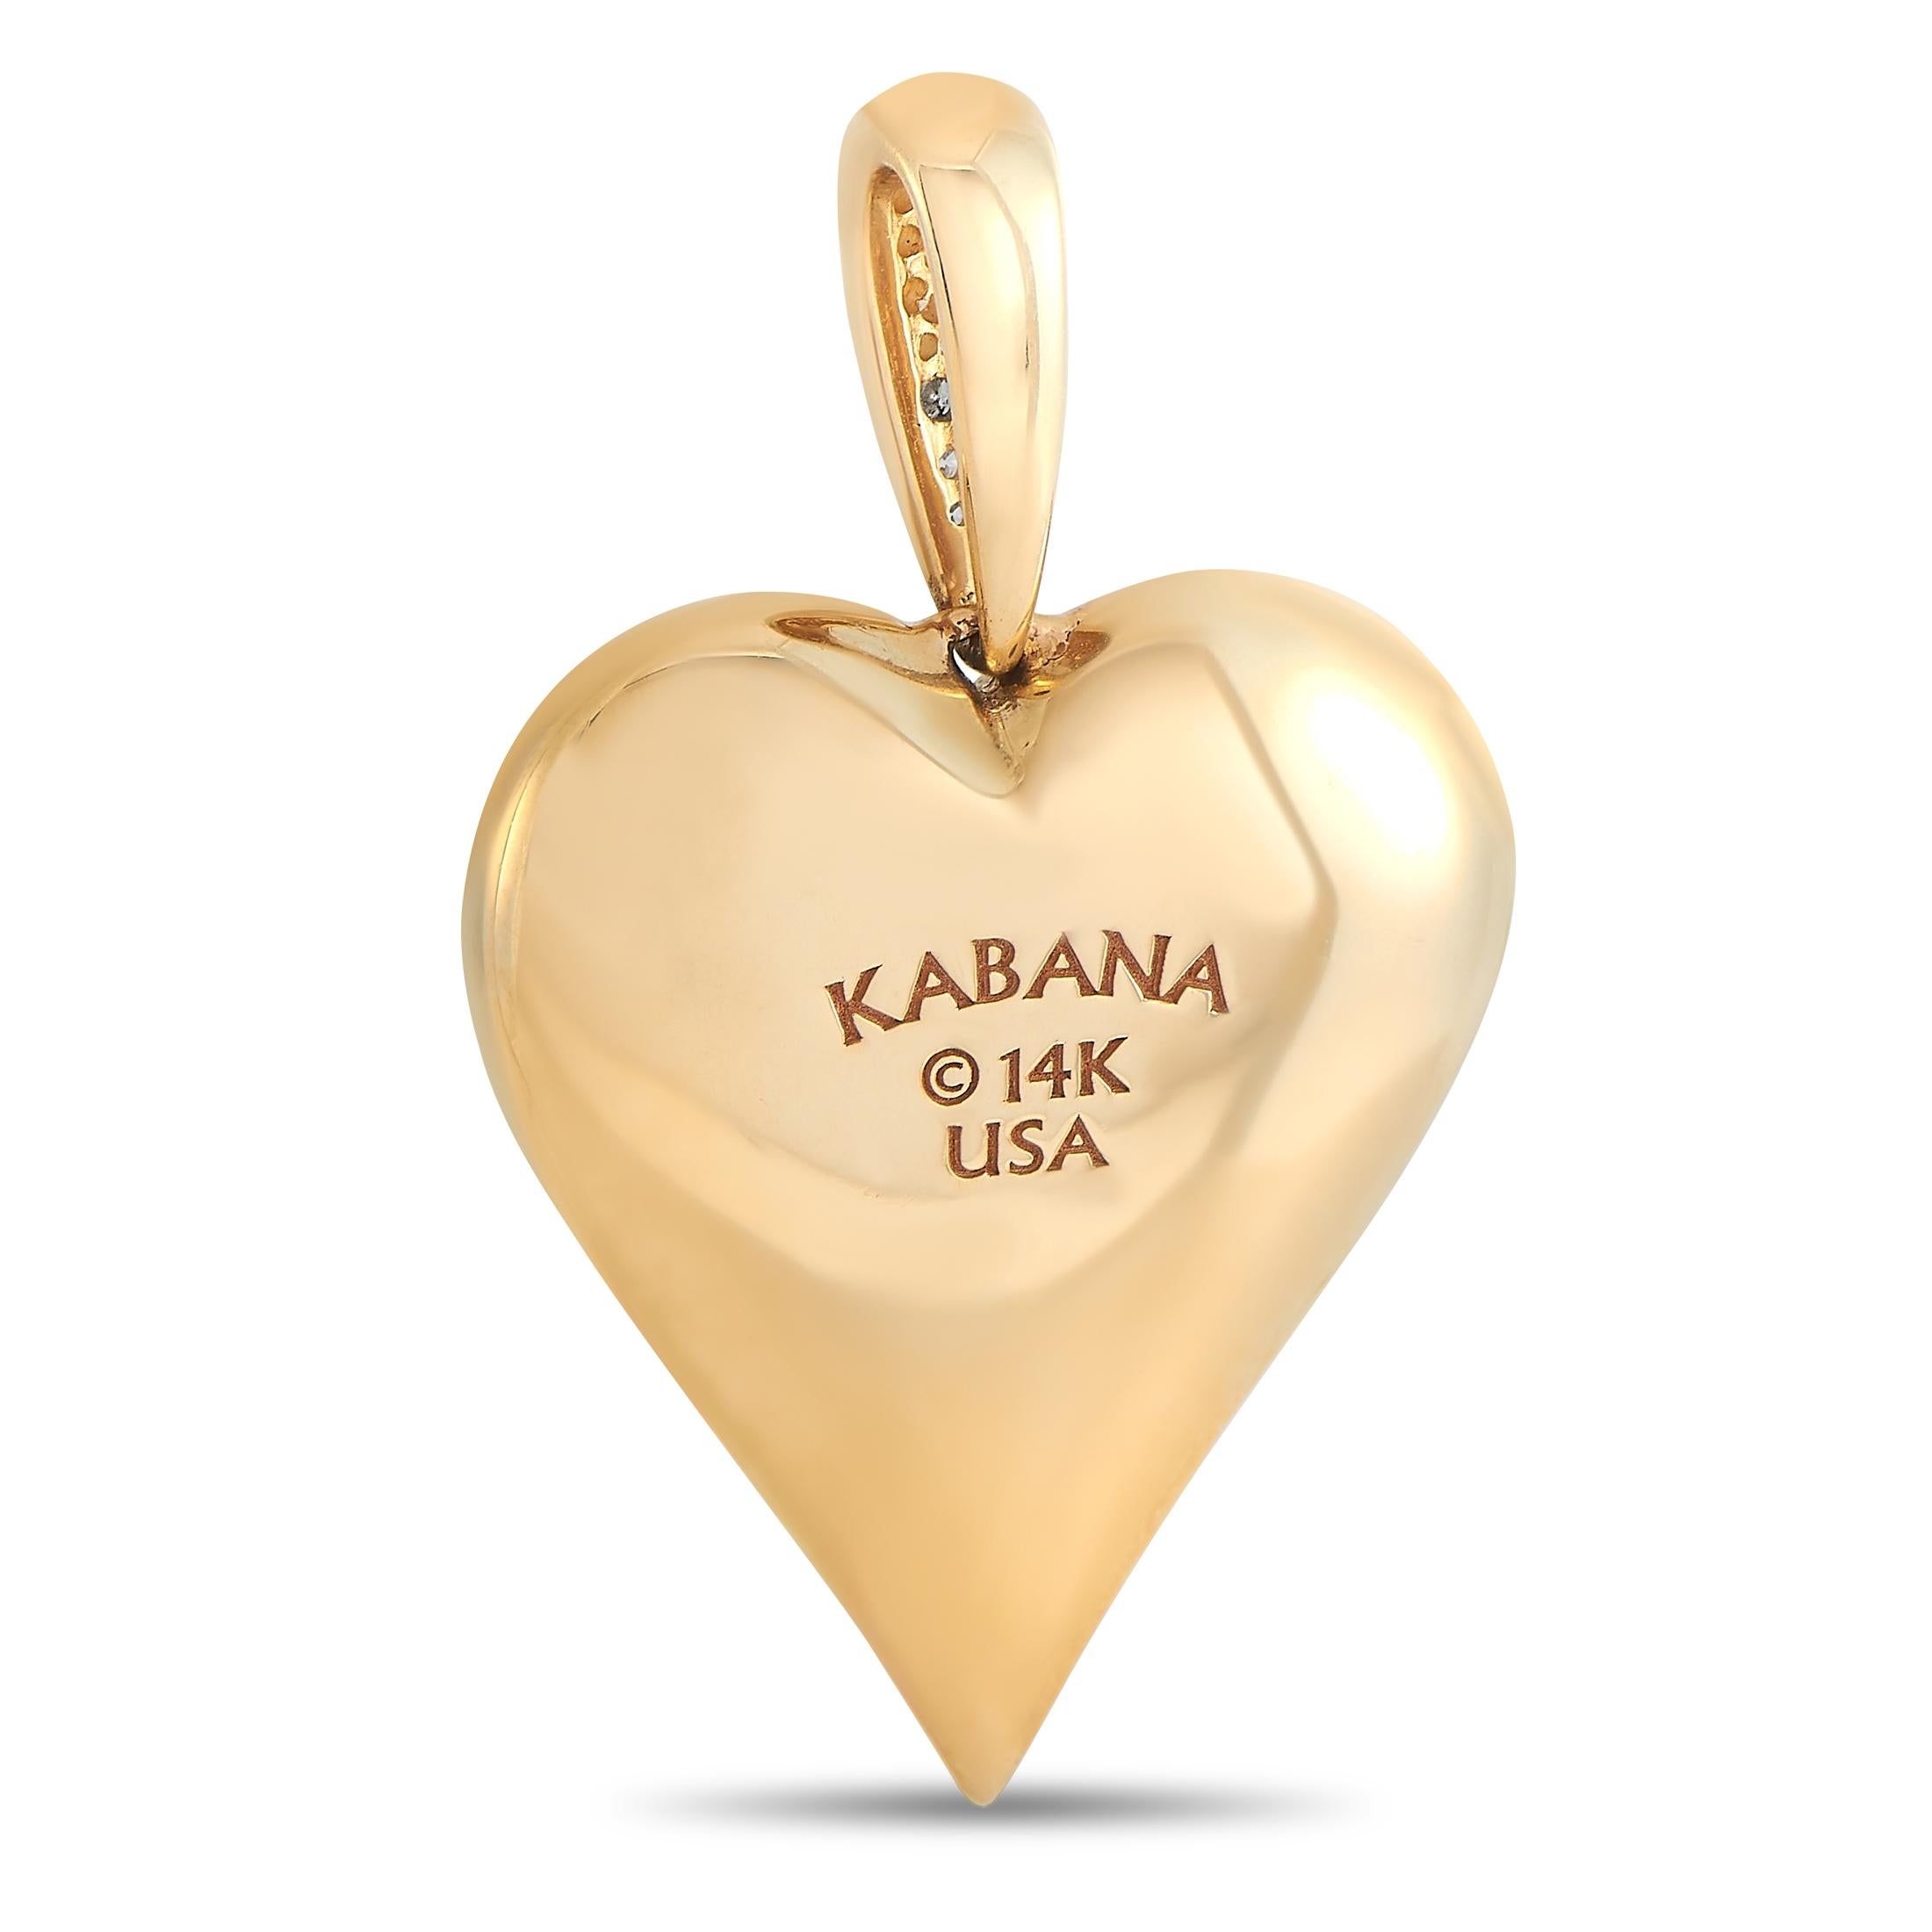 This unique Kabana heart pendant is made with 14K yellow gold. The pendant is inlaid with Onyx and set with 0.21 carats of small round-cut diamonds. The pendant measures 1.5 inches in height by 1.00 inches in width and weighs a total of 12.9 grams.